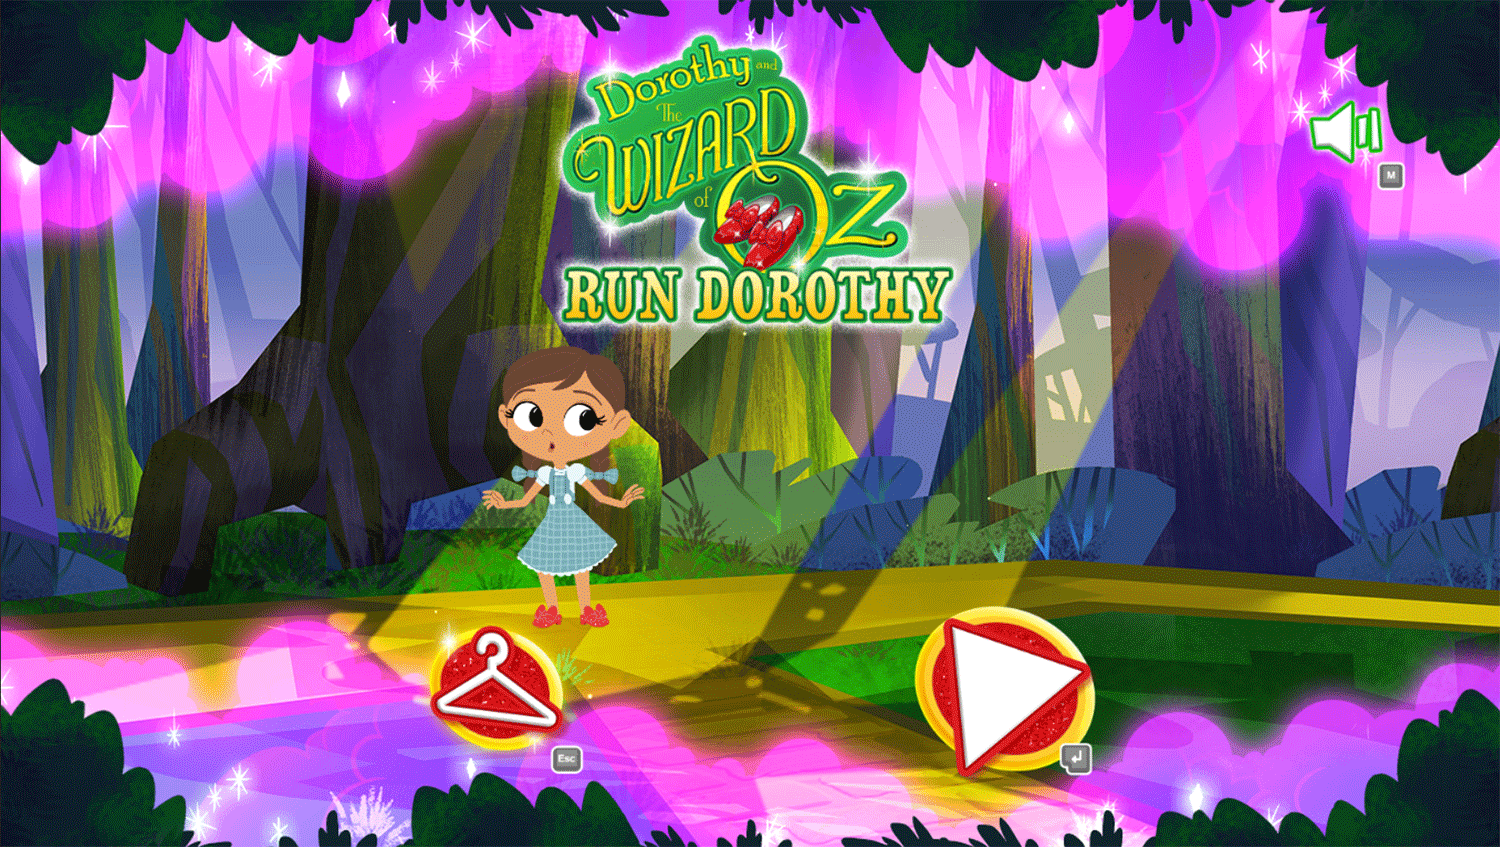 Dorothy and the Wizard of Oz Run Dorothy Game Welcome Screen Screenshot.